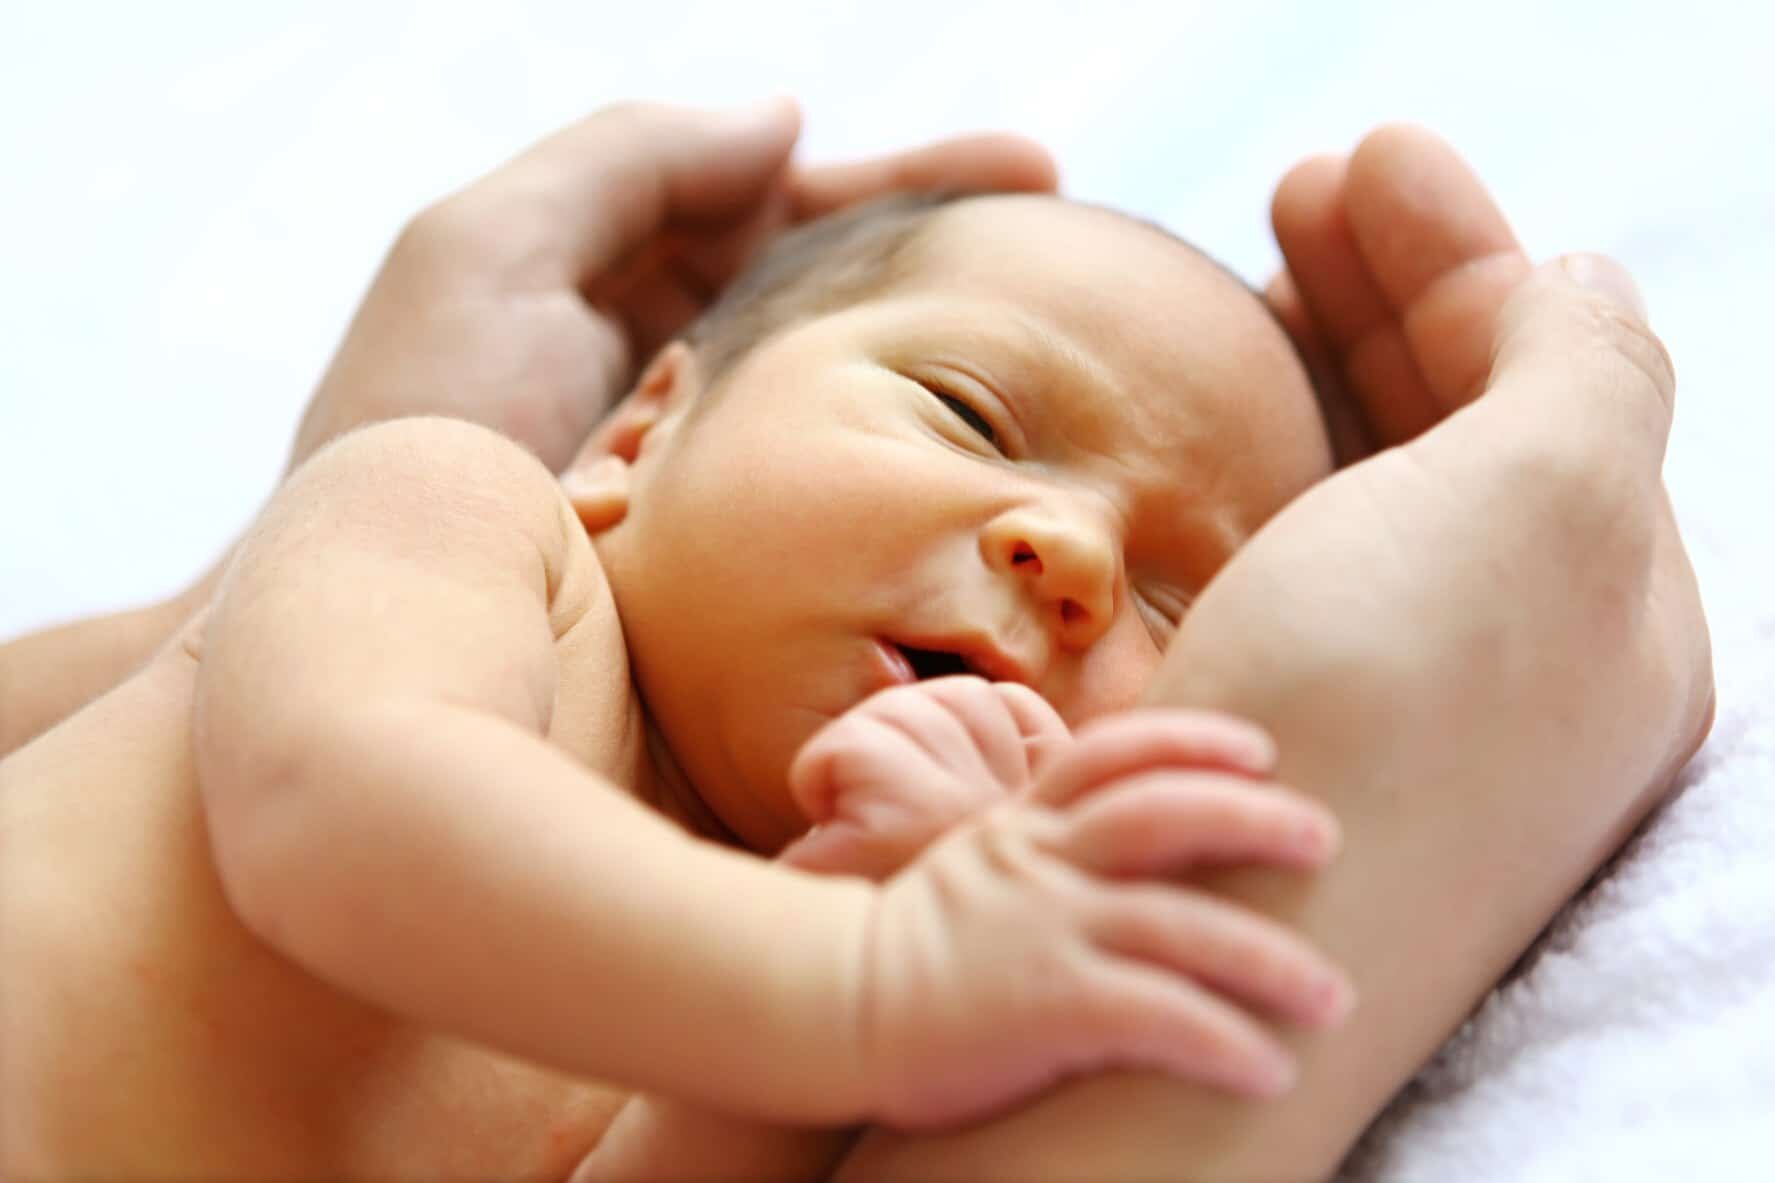 Baby care and infant health guidelines